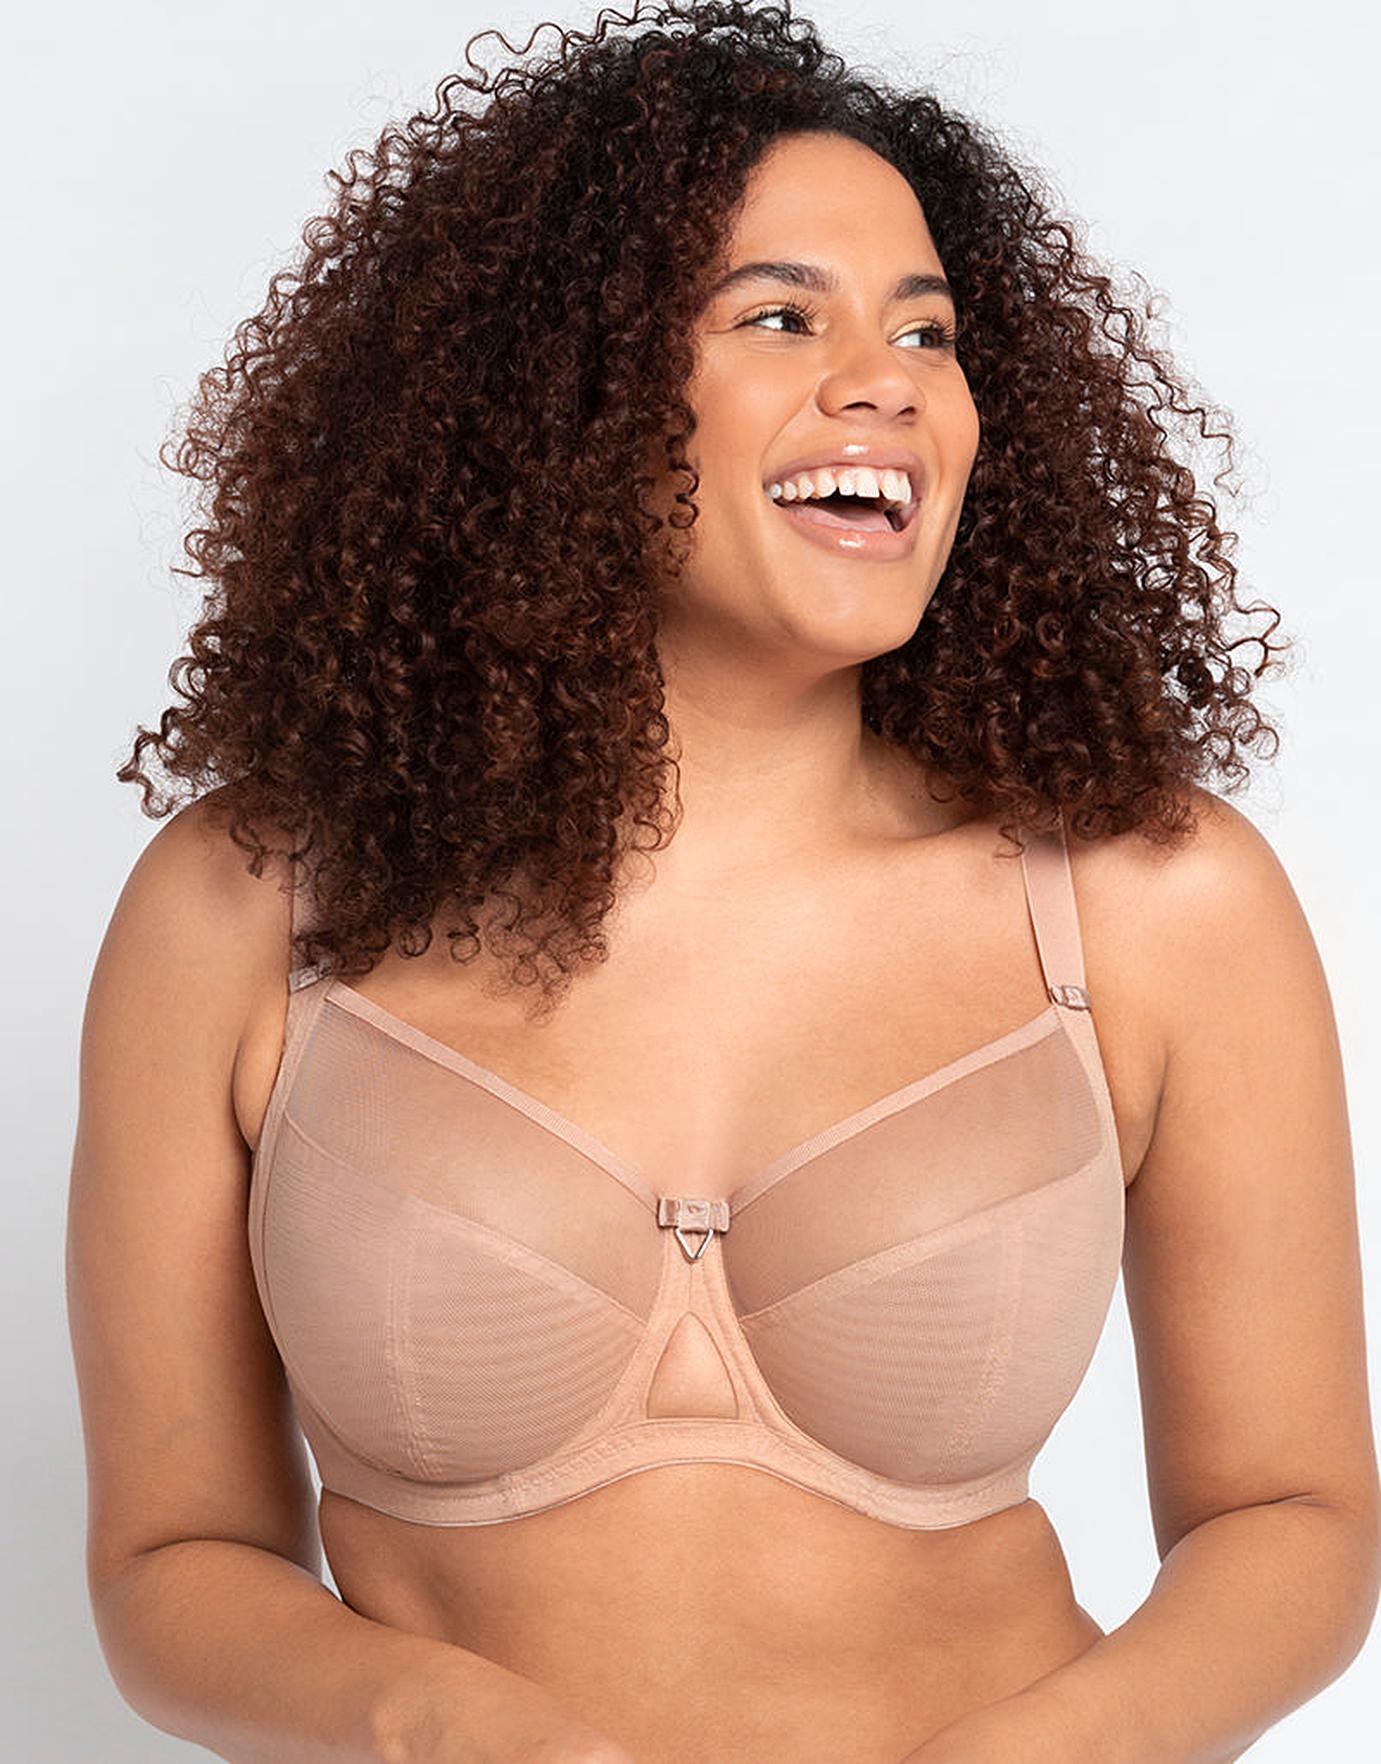 New to all this: does this Curvy Kate bra fit? 40H - Curvy Kate » Top Spot  Balconette Bra (CK015100)